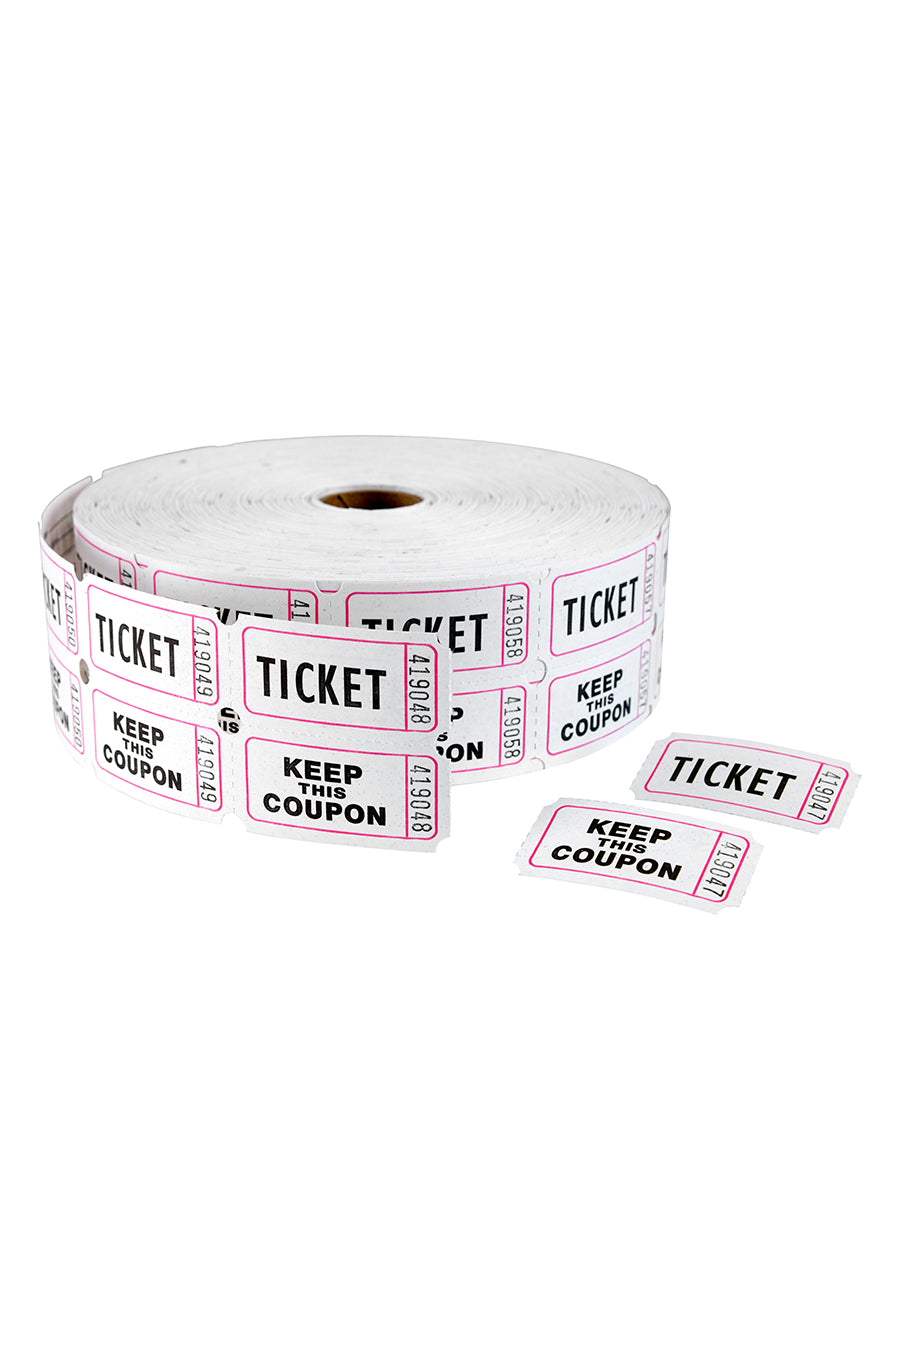 Double Ticket Roll, "Ticket/Keep This Coupon", White, 2000 Tickets/Roll